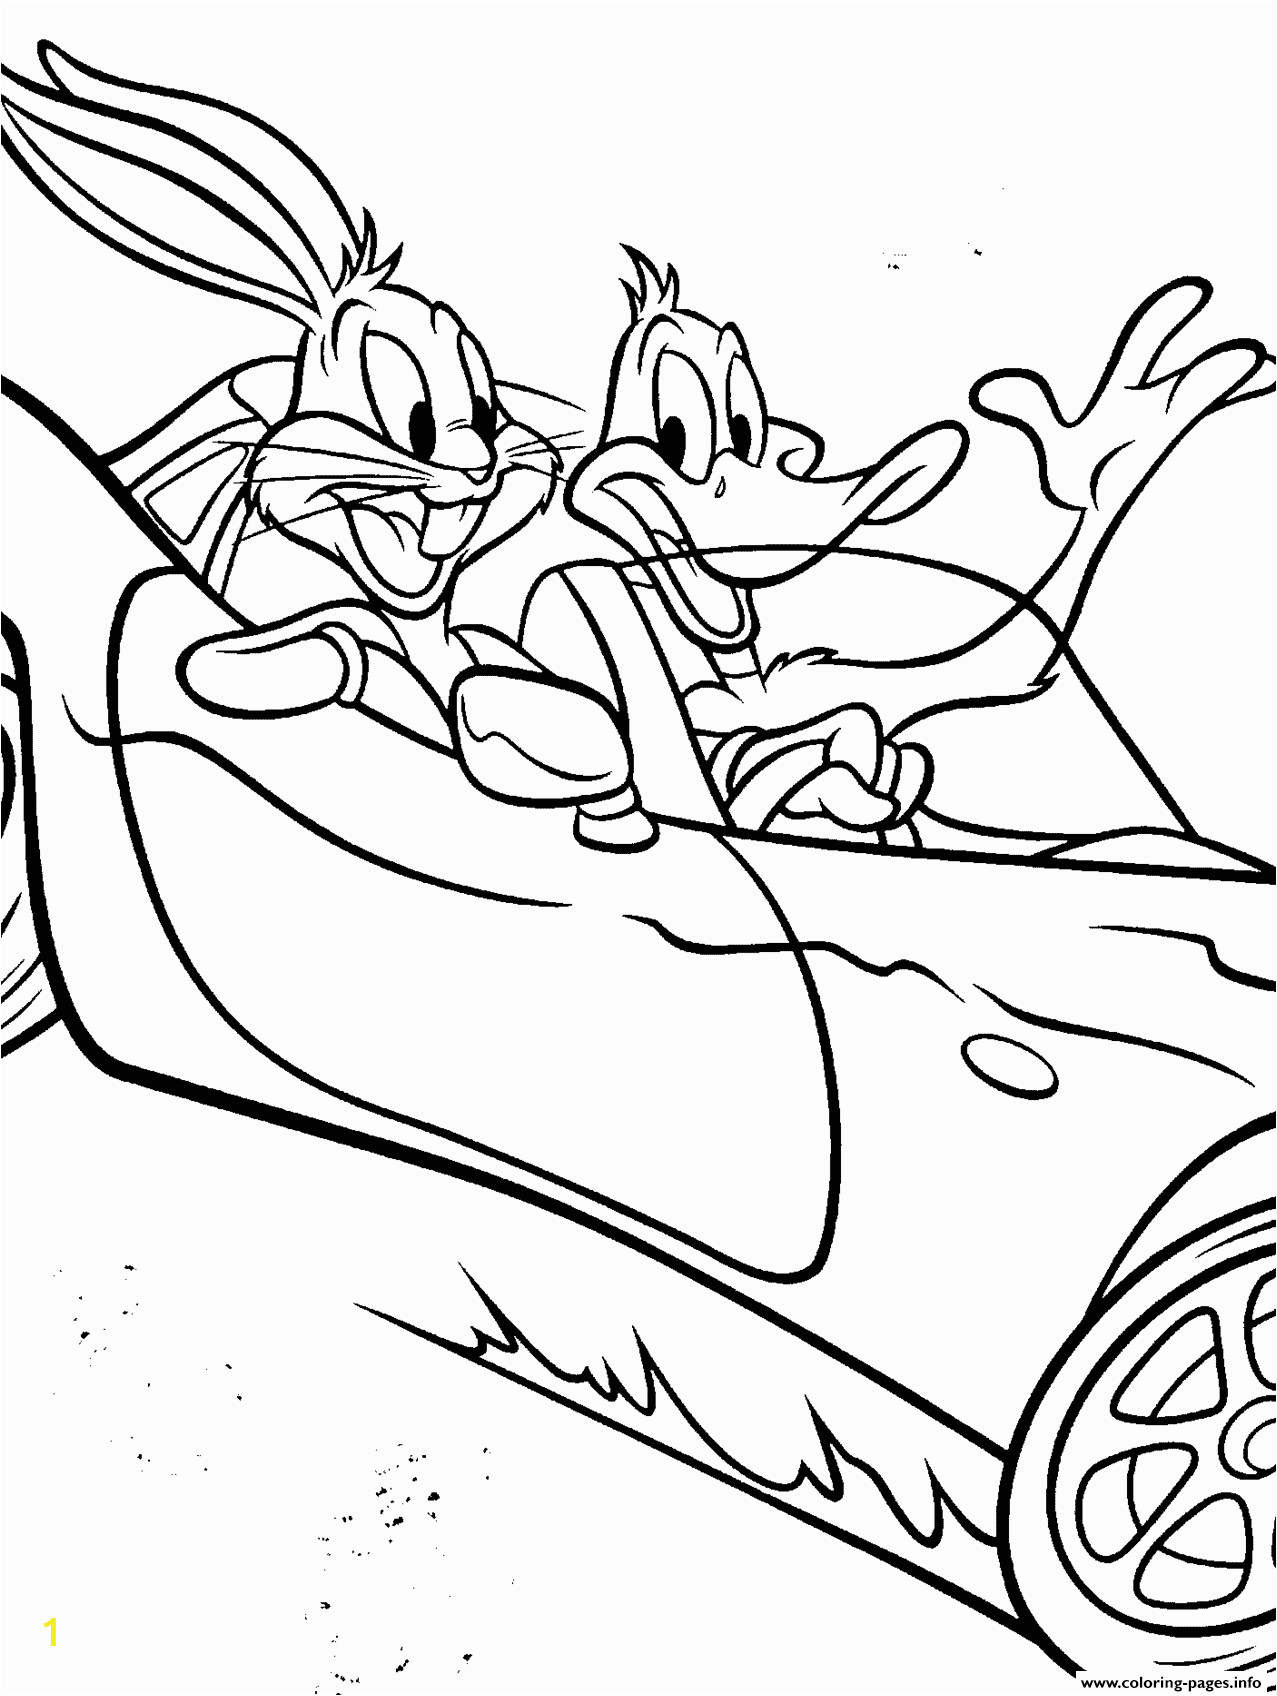 daffy duck and bugs bunny pictures of looney tunes s44cb printable coloring pages book 8957